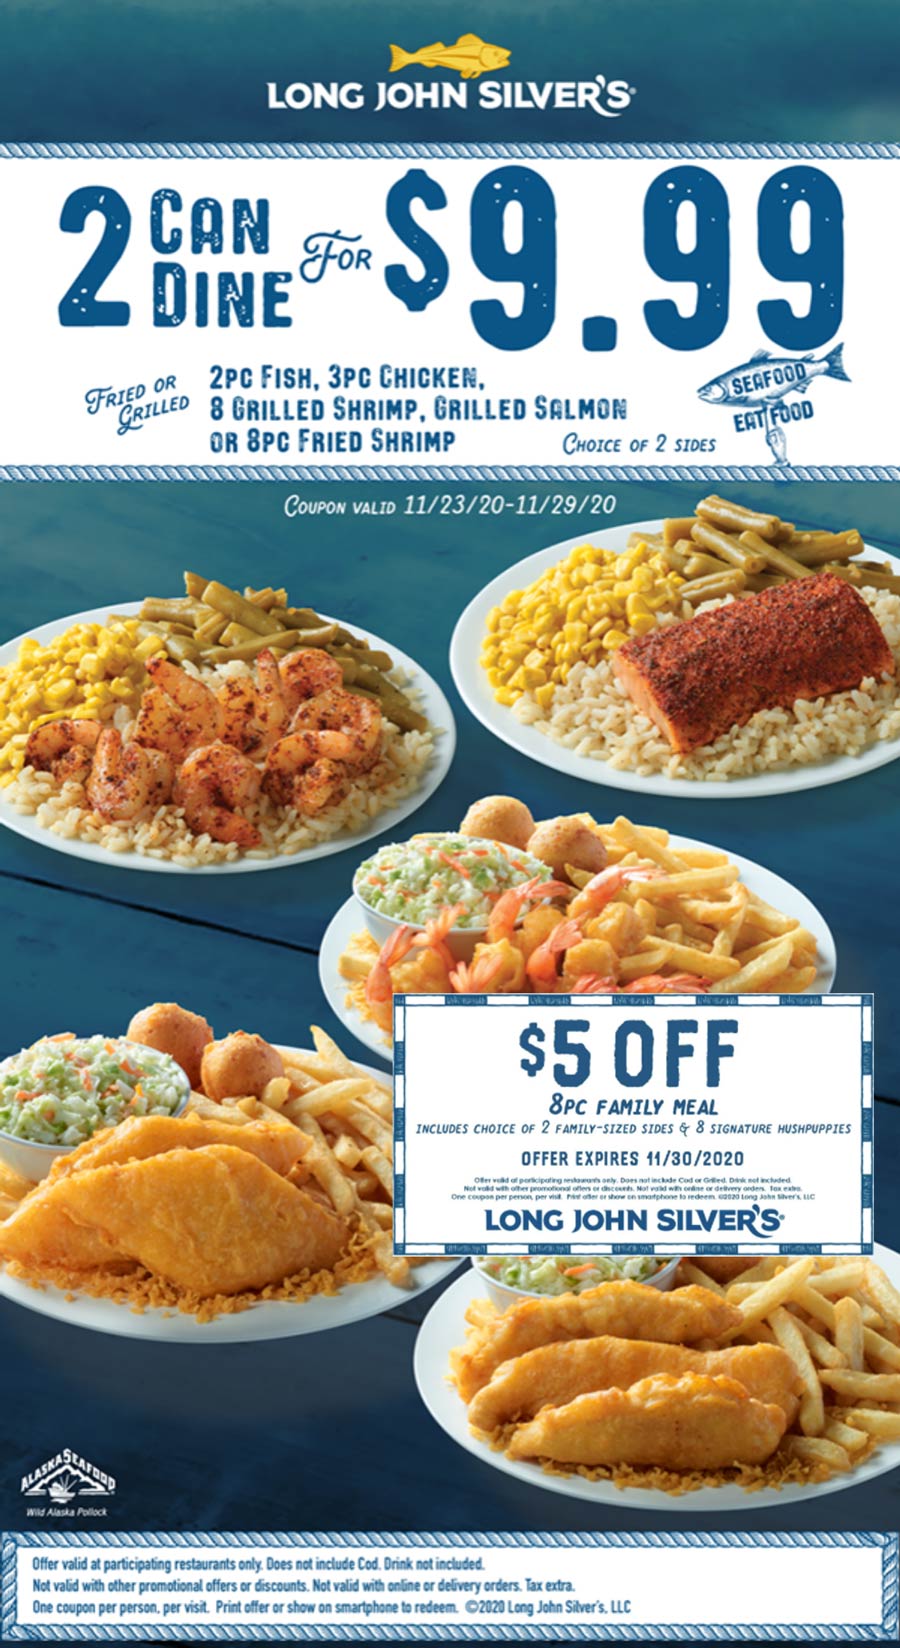 5 off 8pc family meal & more at Long John Silvers longjohnsilvers